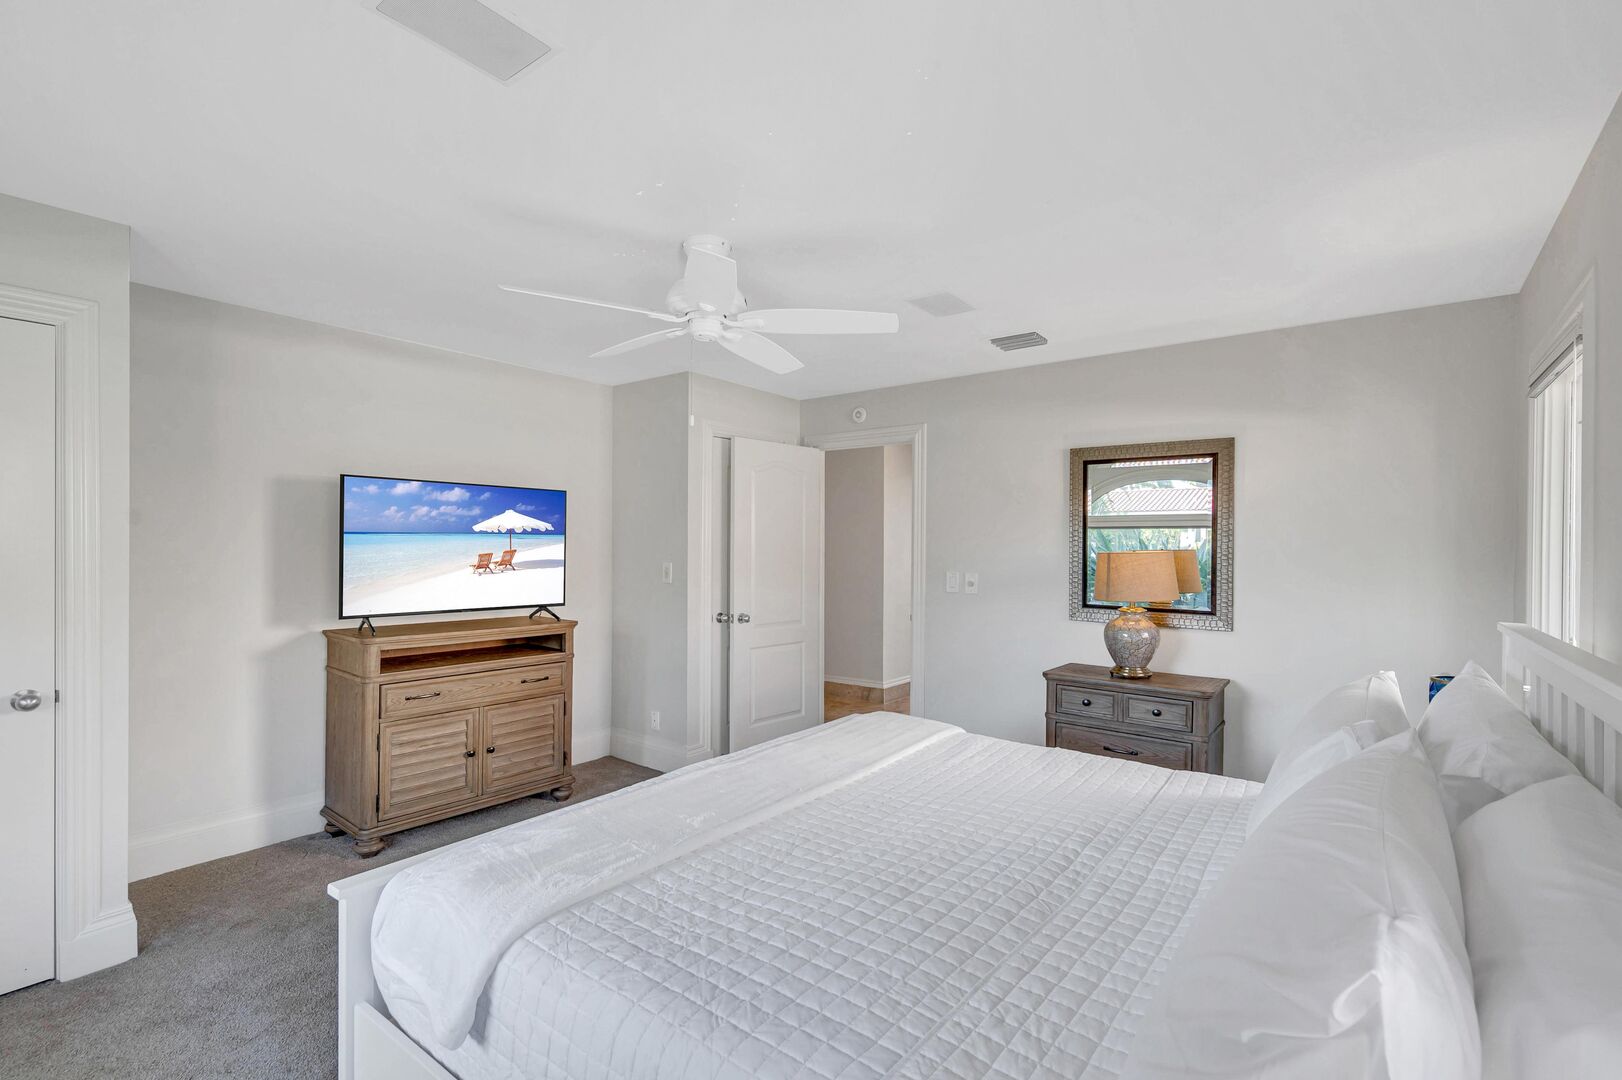 Bedroom Four offers a king size bed, smart TV.